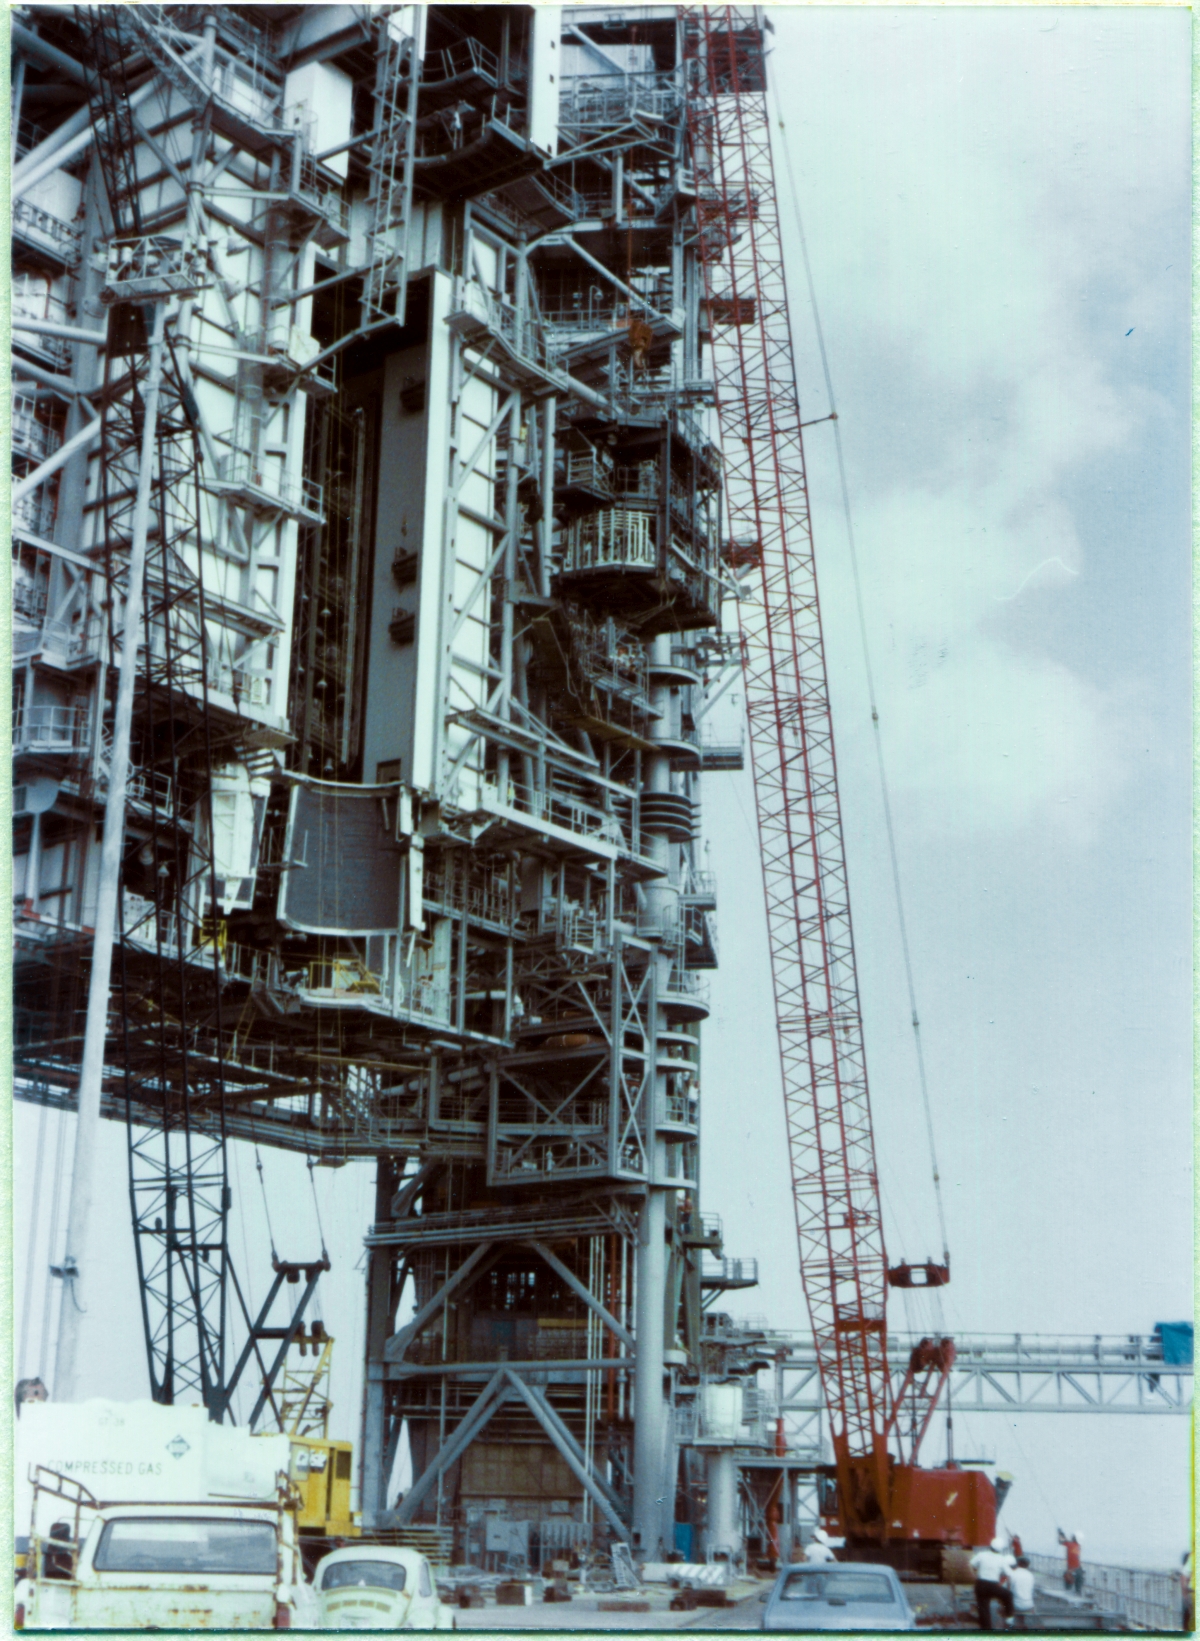 Image 093. At Space Shuttle Launch Complex 39-B, Kennedy Space Center, Florida, the Orbiter Mid-Body Umbilical Unit Lift has proceeded to the point where the OMBUU has reached its final elevation, and now the crane operator is booming right, ever so slowly, ever so carefully, bringing the OMBUU closer and closer to where it will rest against the face of the Rotating Service Structure and be bolted permanently into place. The criticality of the work the two Union Ironworkers working for Ivey Steel, down on the ground, work-gloved hands gripping the tag lines, fine-positioning the OMBUU, has stepped up a couple of notches, and you can see them both, over by the Flame Trench, putting their backs into it, with the tag lines clearly in significant tension, keeping the OMBUU from bashing into anything up on the RSS as it slowly, creepingly, closes in to a steel-on-steel position. Additional personnel, above and beyond the gang of ironworkers who will be doing the actual connecting, can be seen at the end of the OMBUU Access Catwalk at Elevation 163'-9”, watching things closely. Quality, Safety, Craft Labor, Management, Engineering, Contractor, Structural, Mechanical, Electrical, NASA-direct, and more, all had very good and sufficient reason to be eyes-on as close as possible, at this stage of the Lift. Photo by James MacLaren.